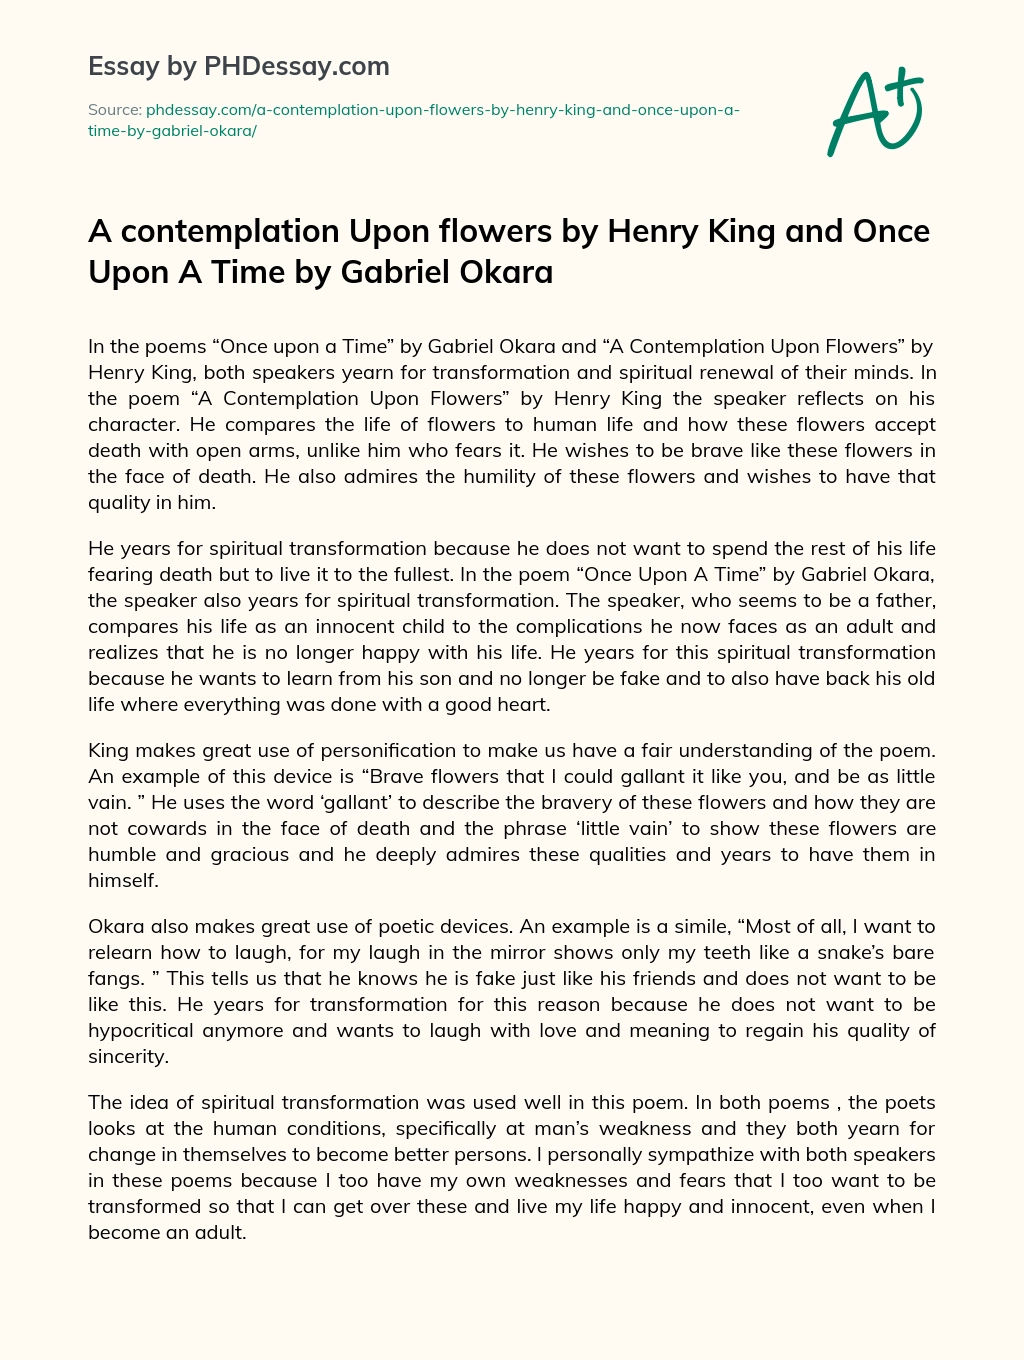 A contemplation Upon flowers by Henry King and Once Upon A Time by Gabriel Okara essay